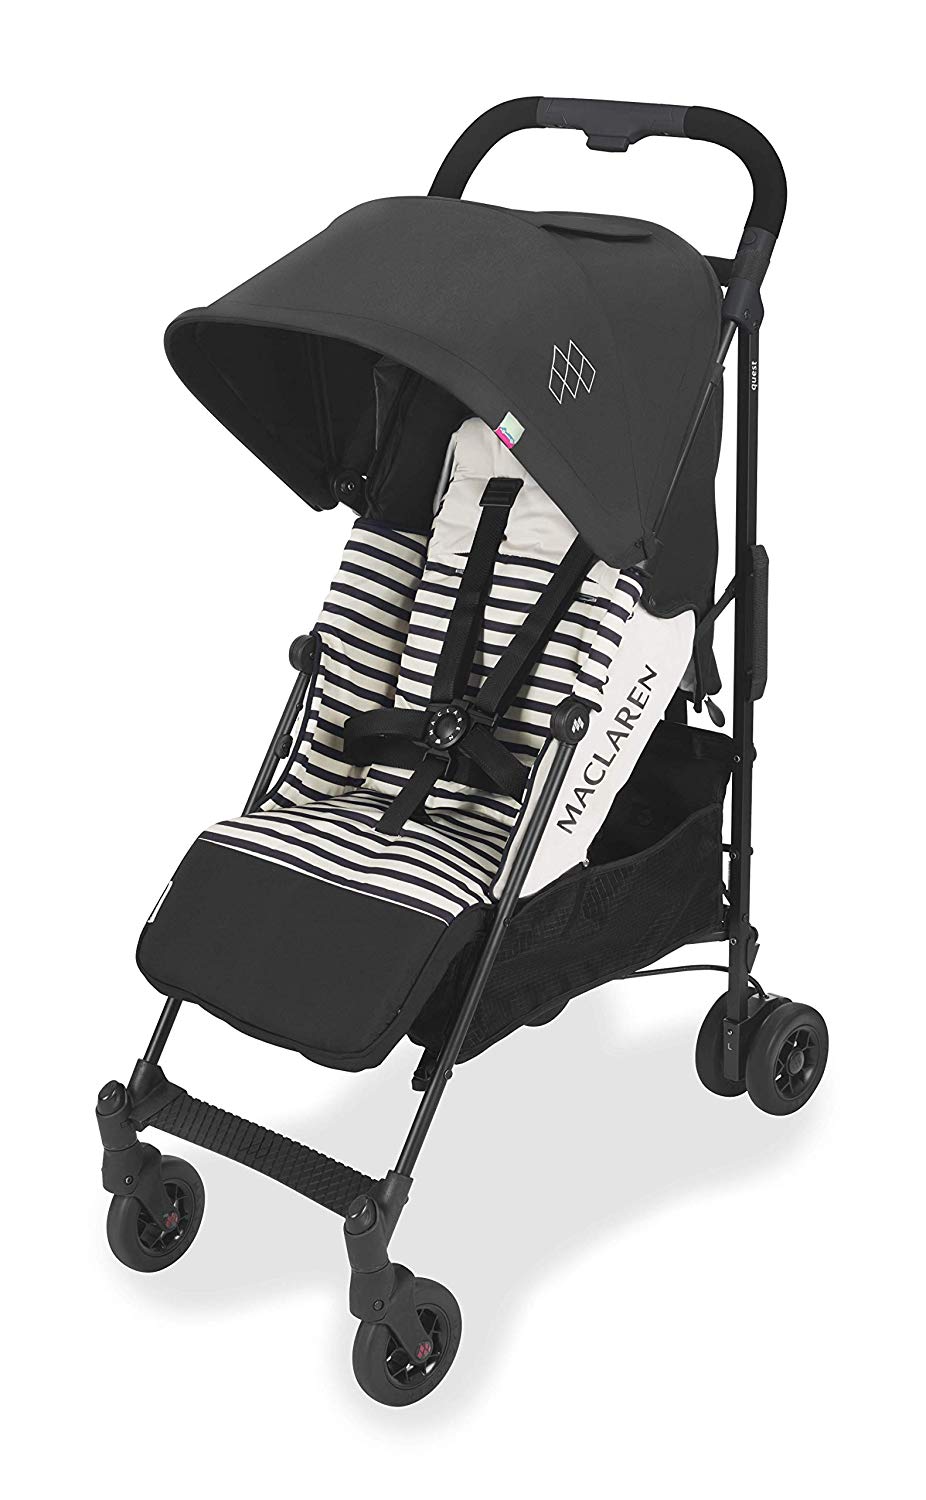 Maclaren Quest Arc Buggy - Ideal for newborns up to 25kg, features a retractable UPF50+/waterproof canopy, seat with adjustable positioning. Compatible with Maclaren bassinets